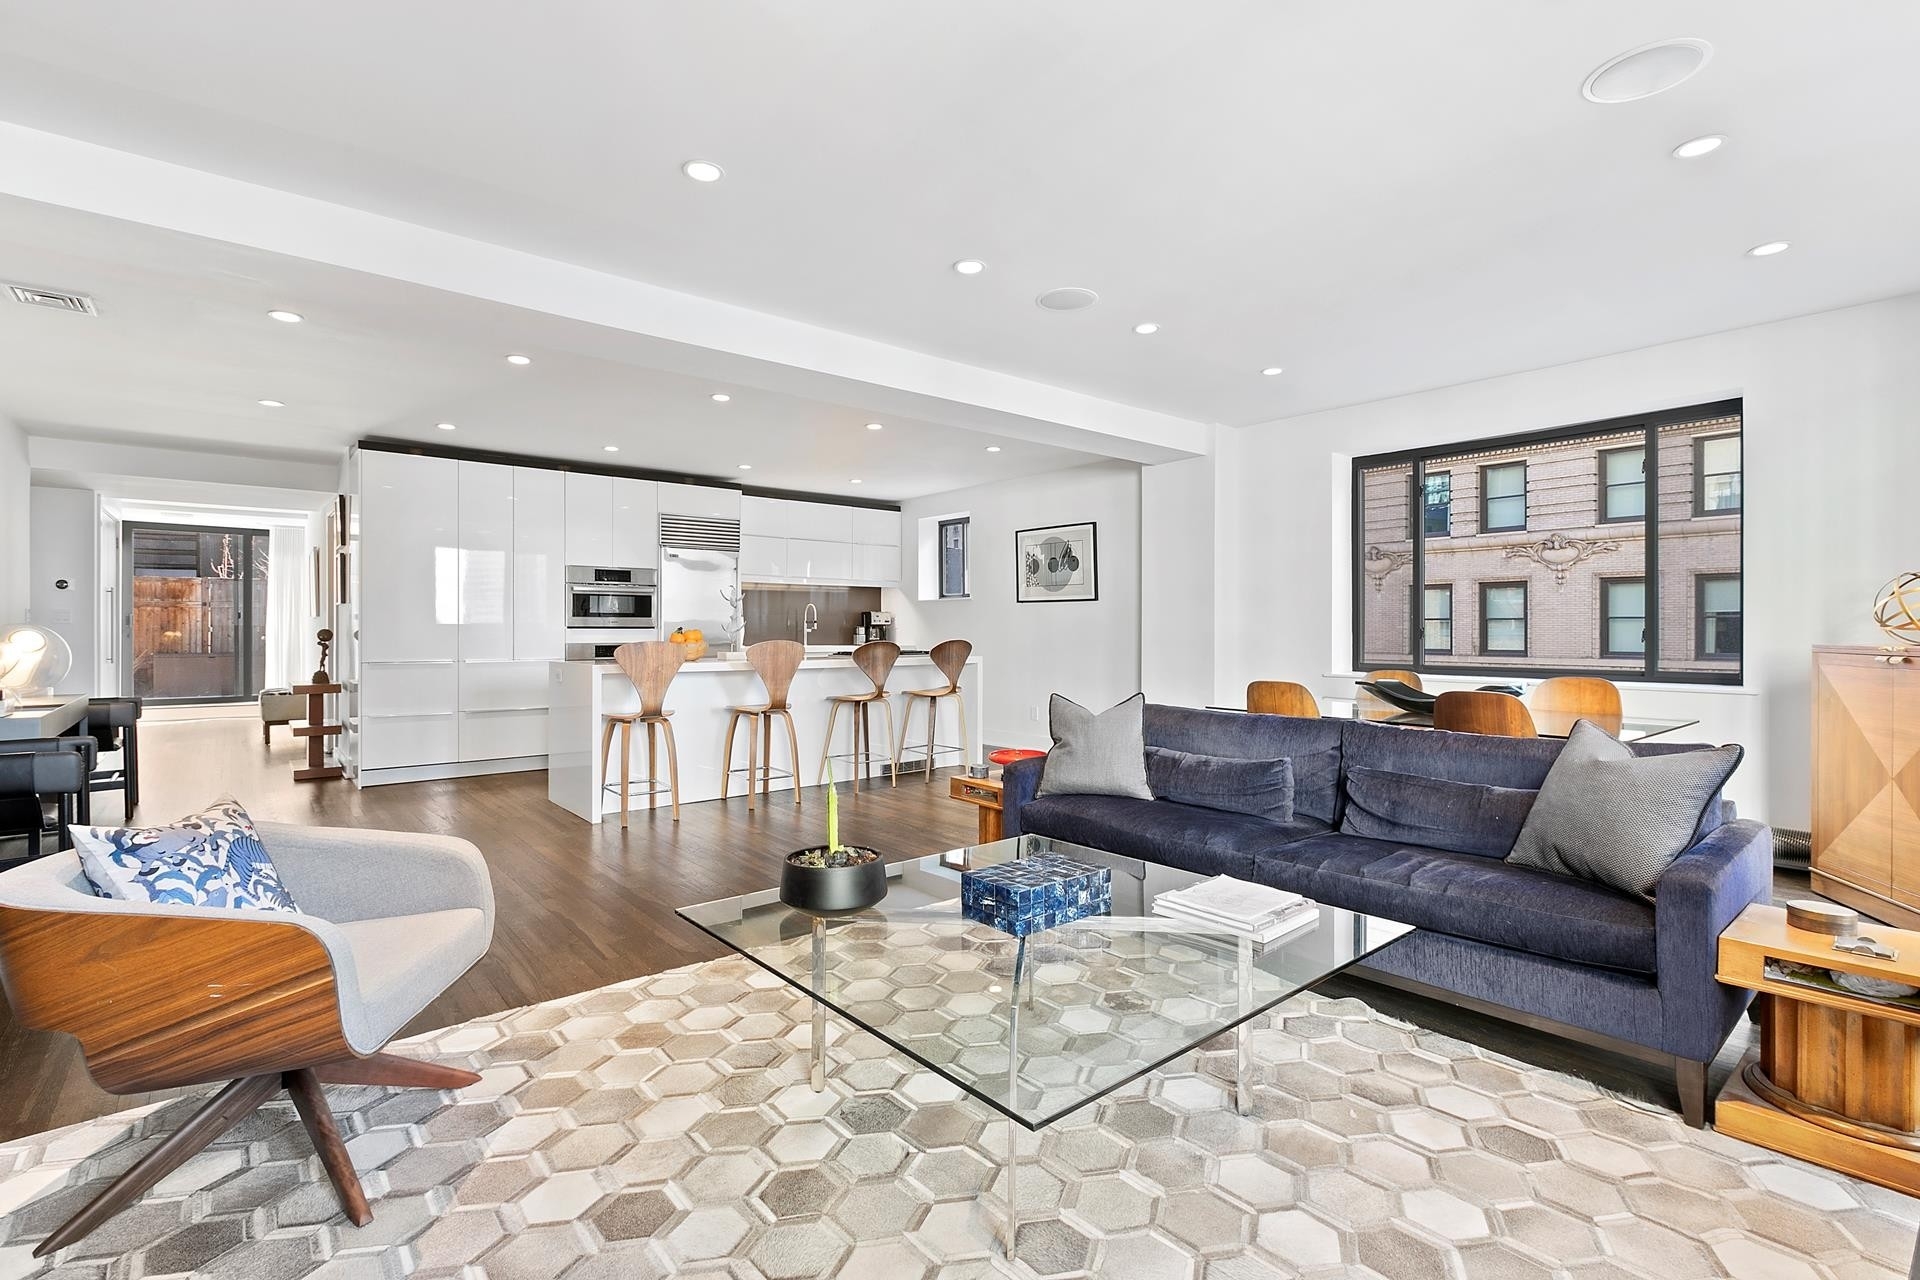 Co-op Properties for Sale at 176 BROADWAY, PHC Financial District, New York, NY 10038